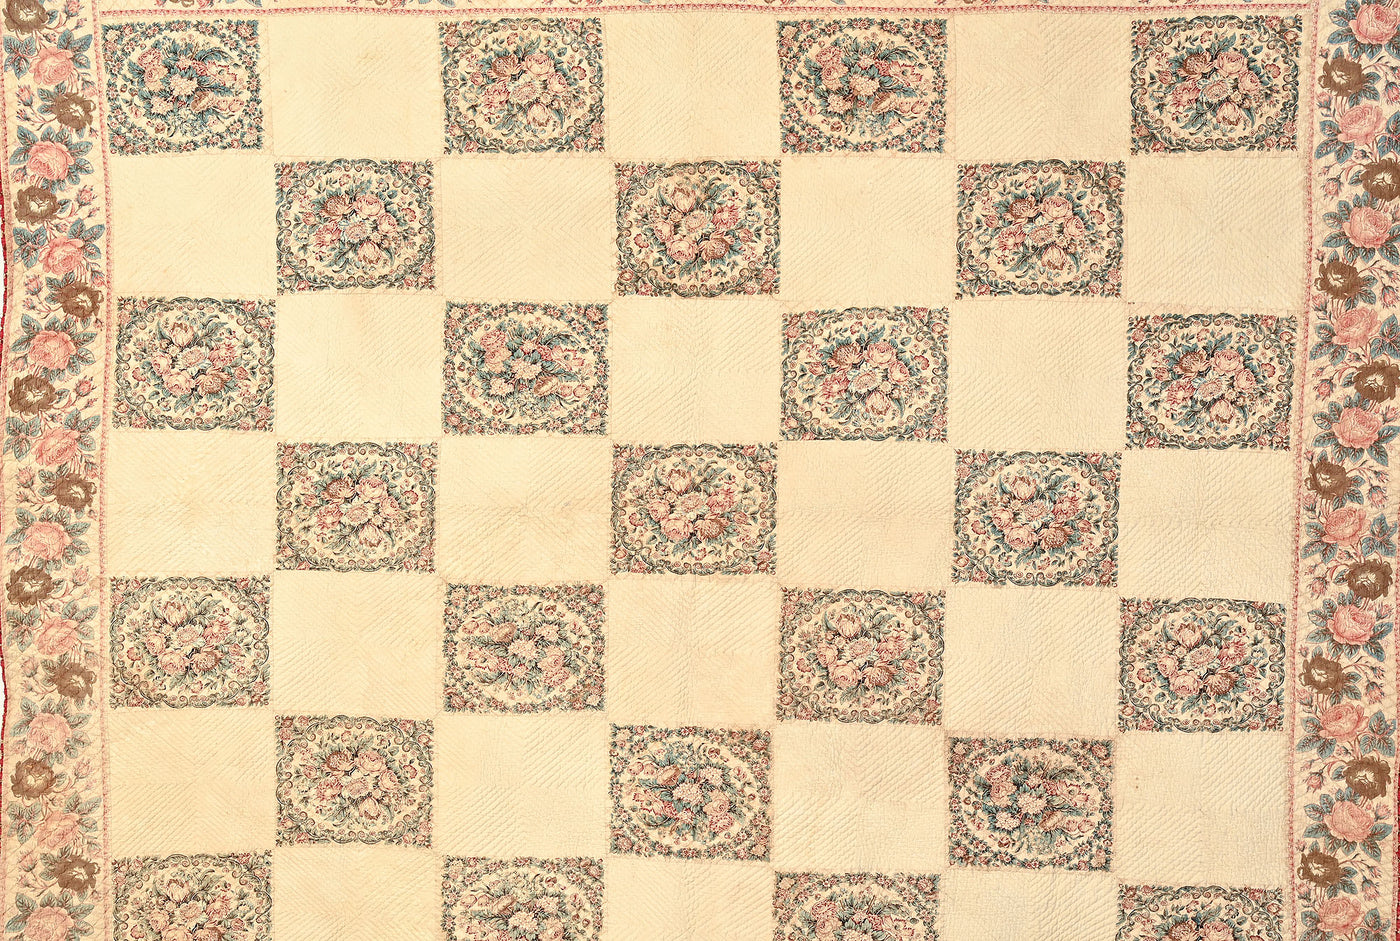 Early Chintz Quilt with Rectangular Panels